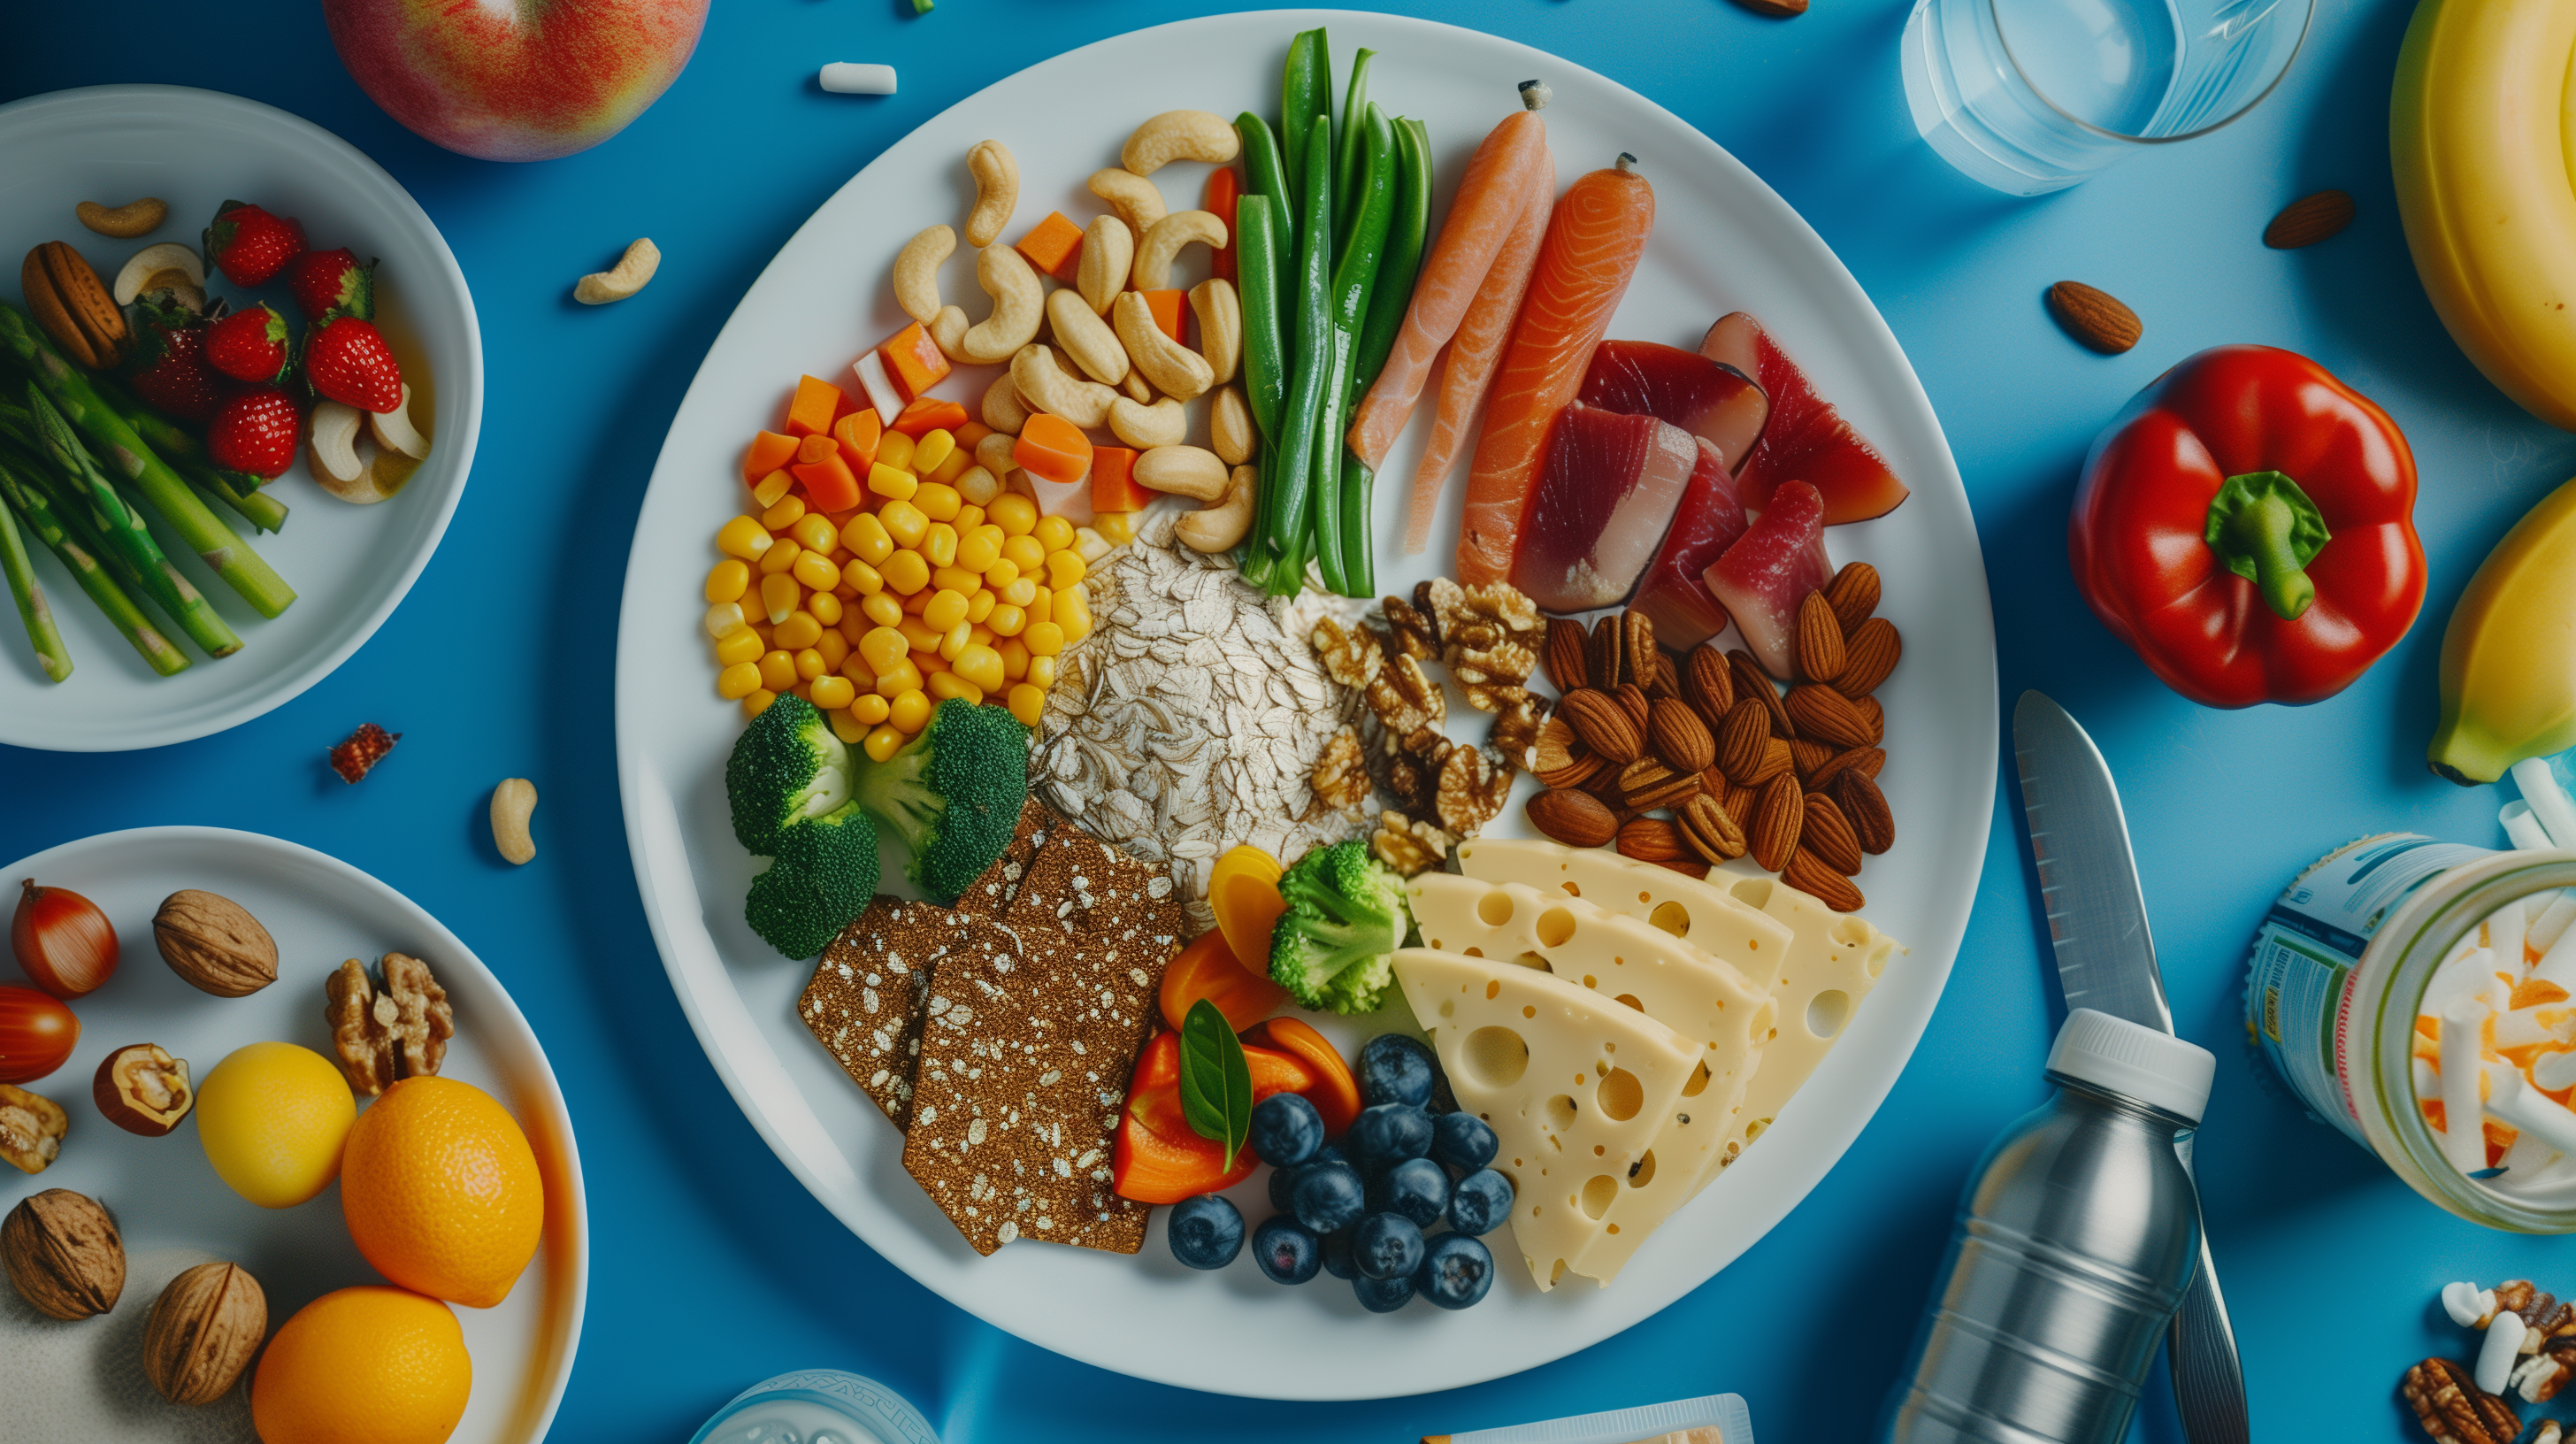 diverse plate divided into sections containing lean proteins, whole grains, fresh vegetables, fruits